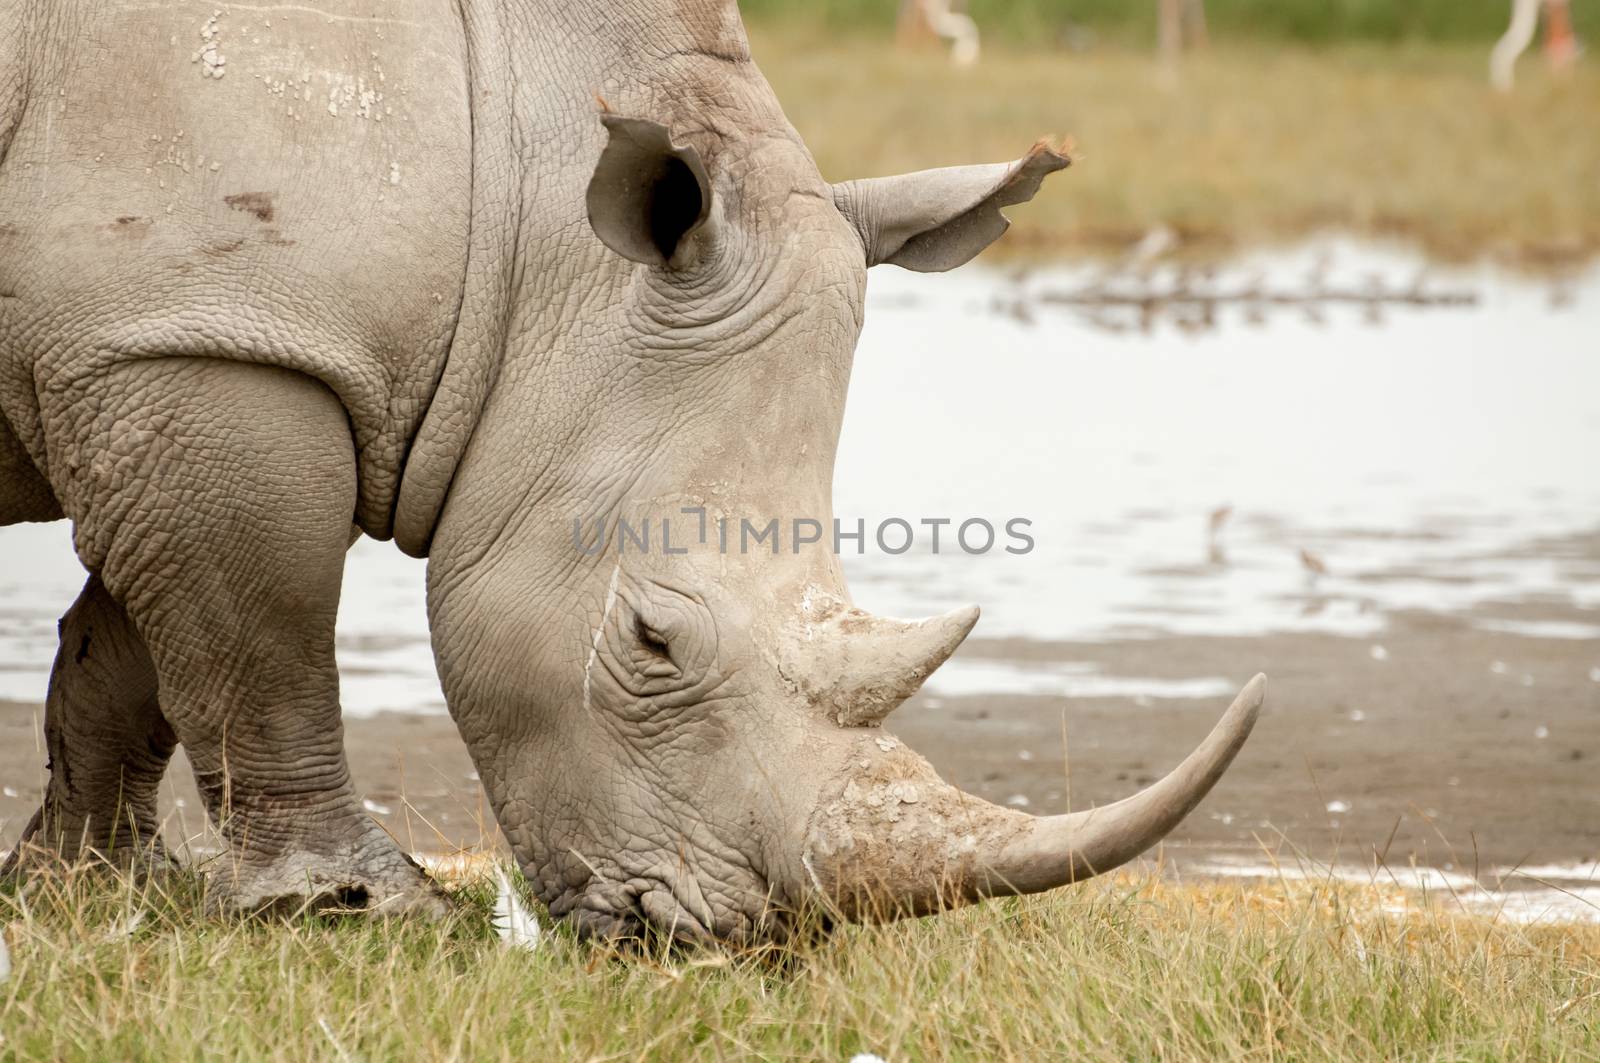 A White Rhinocores grazes on grass nearby the lake.